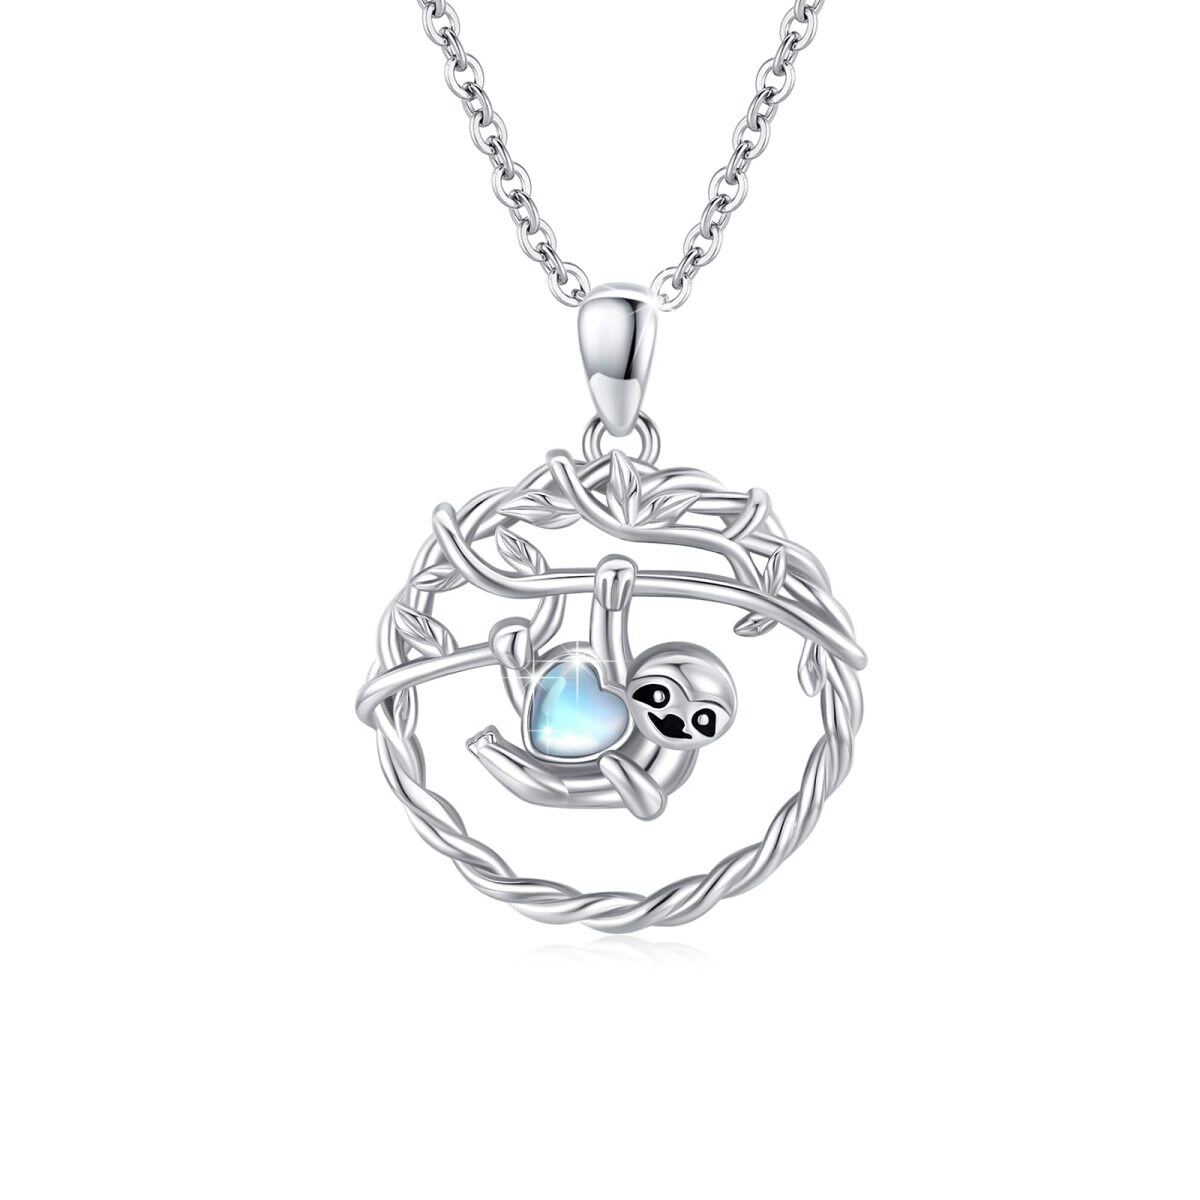 Sterling Silver Heart Shaped Moonstone Sloth Pendant Necklace-1